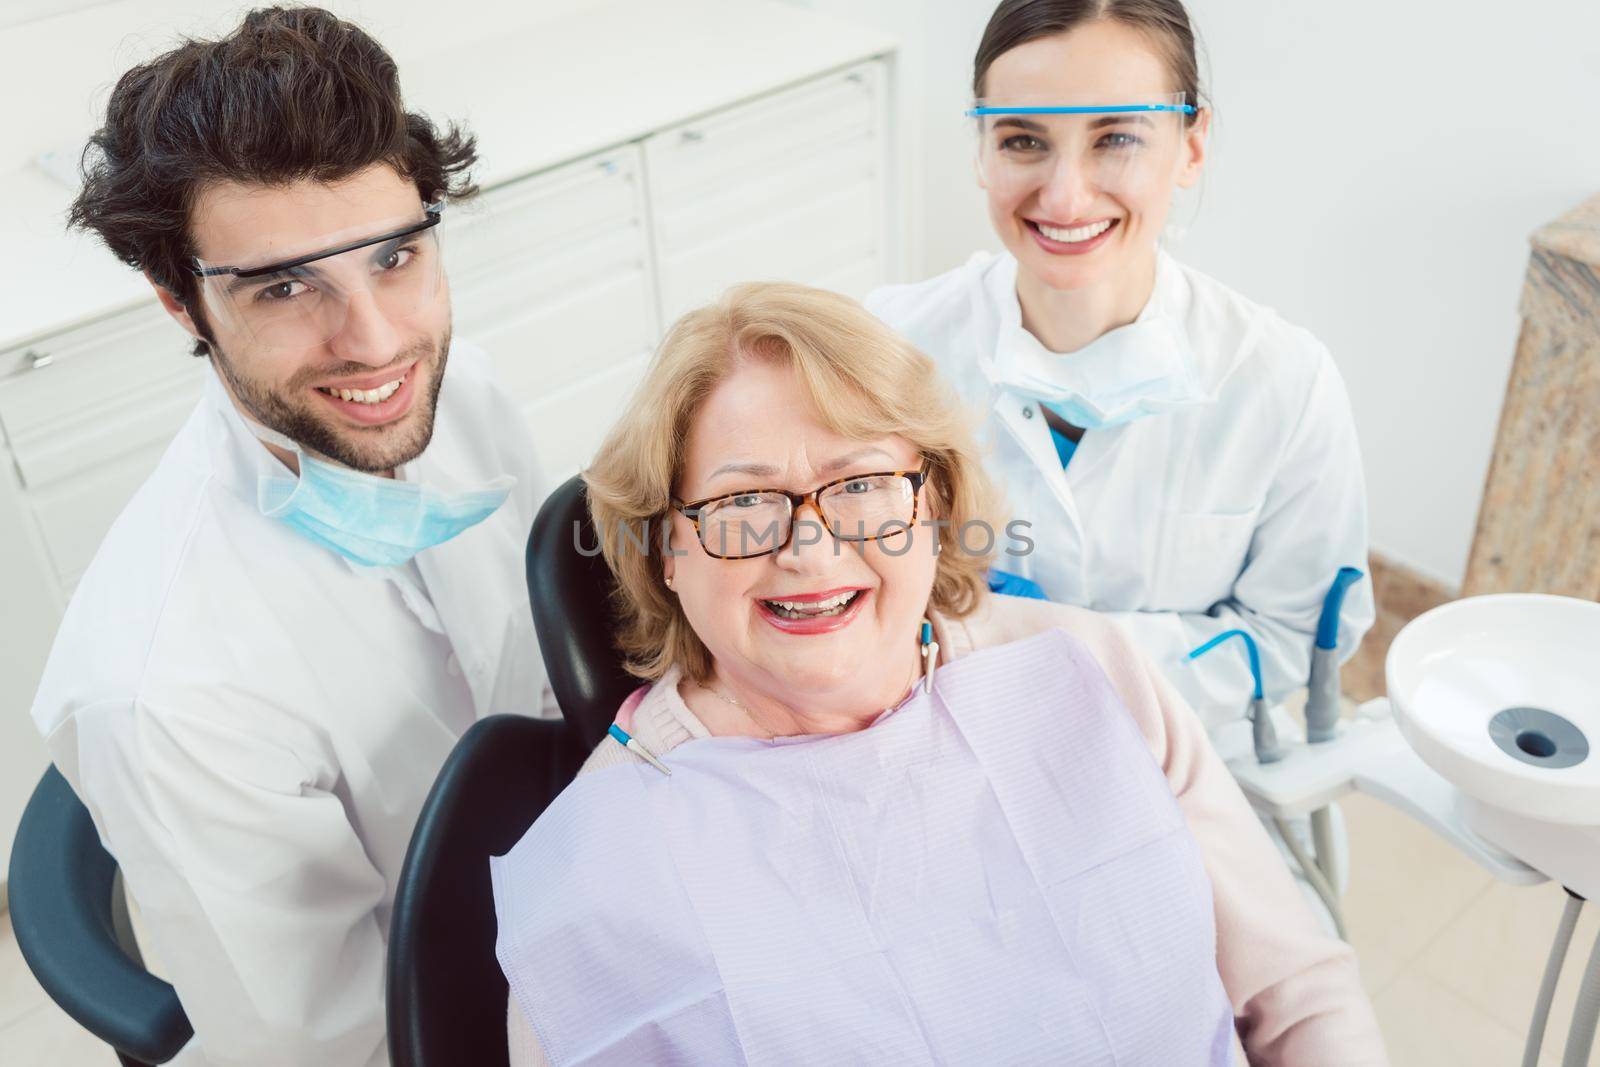 Dentists and patient in surgery looking at camera by Kzenon